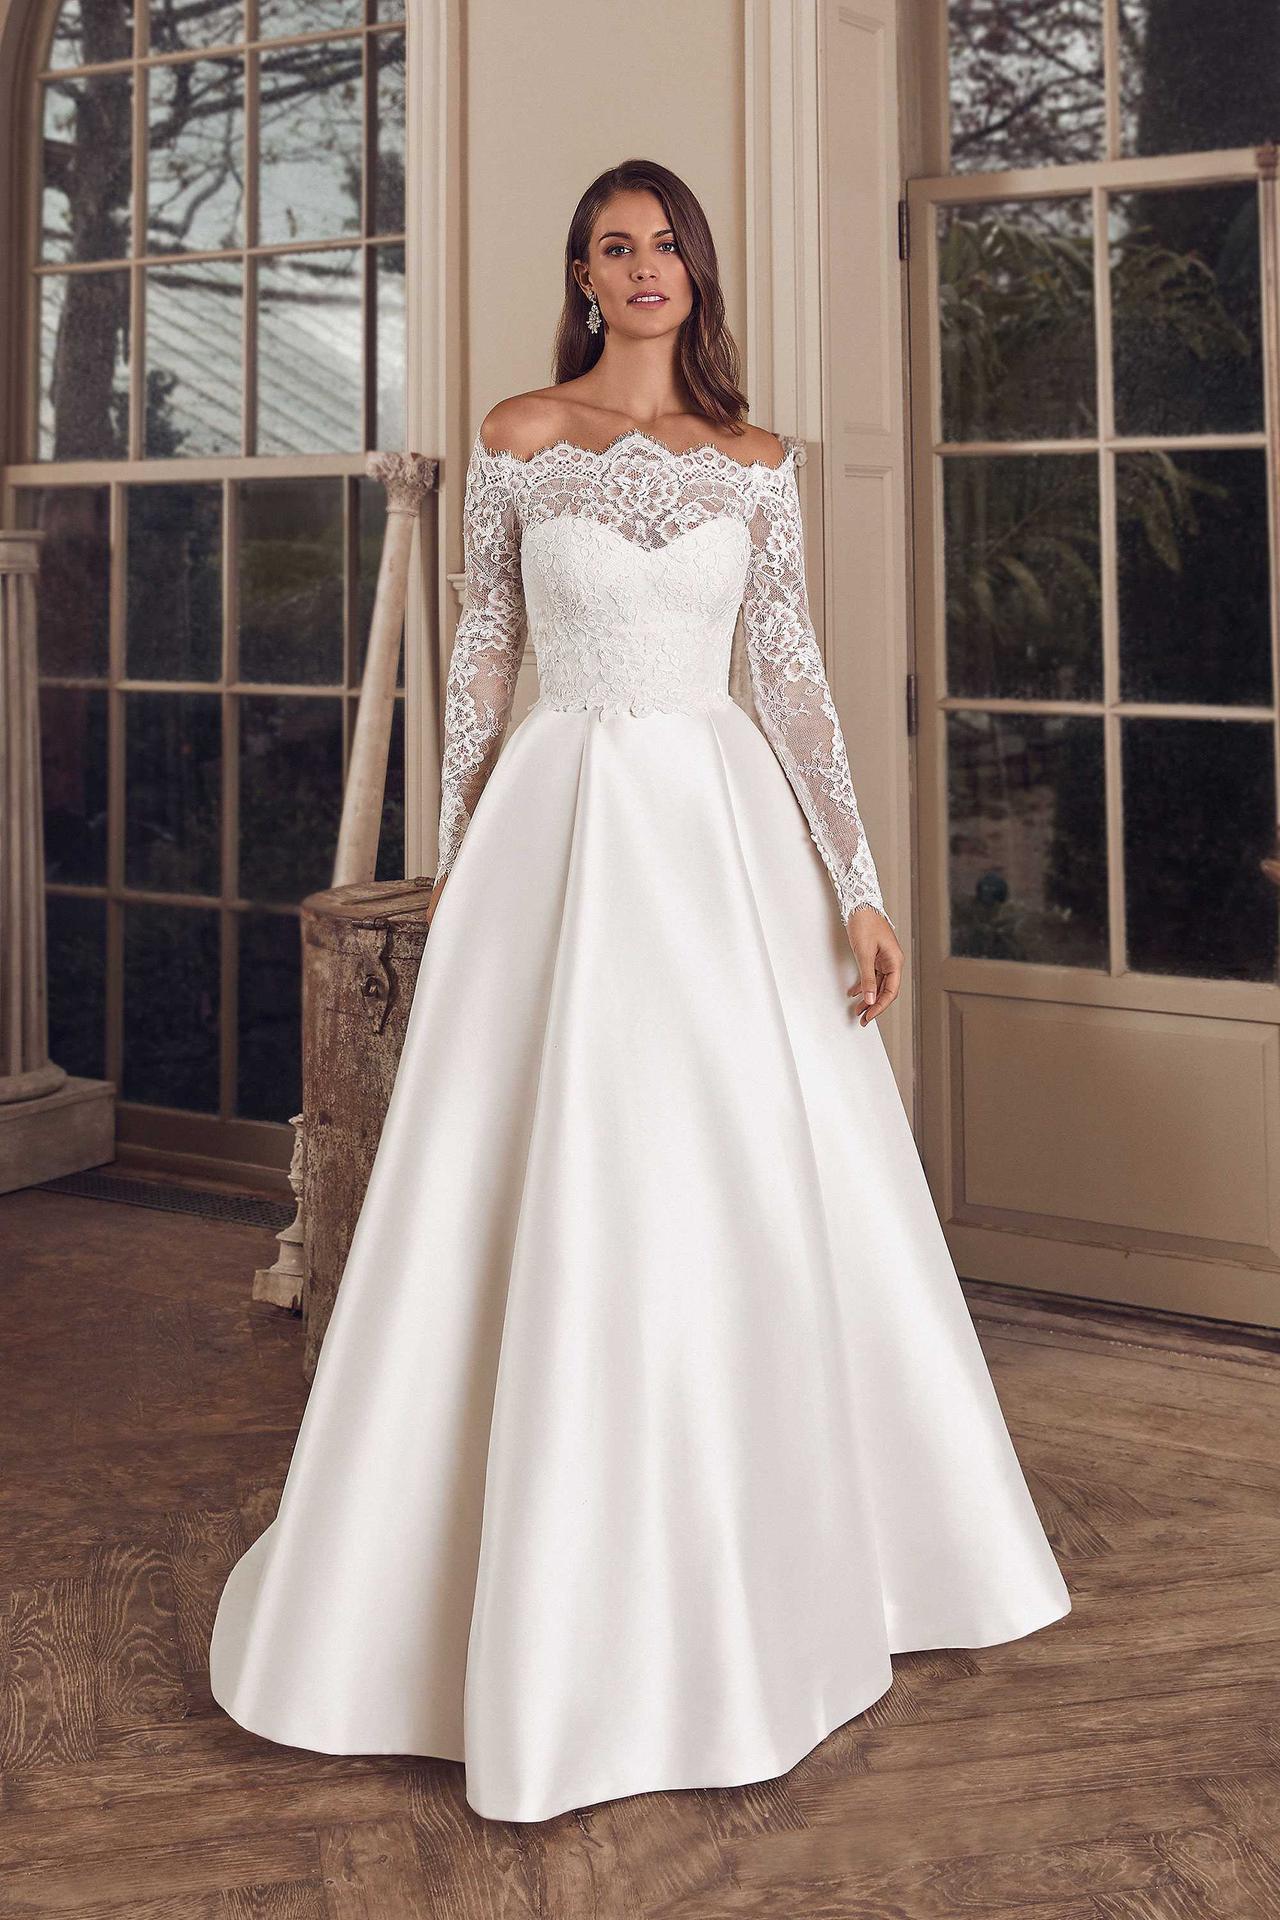 Bridal Dresses Suitable for Large Busts: Tips and Top Picks - EverAfterGuide